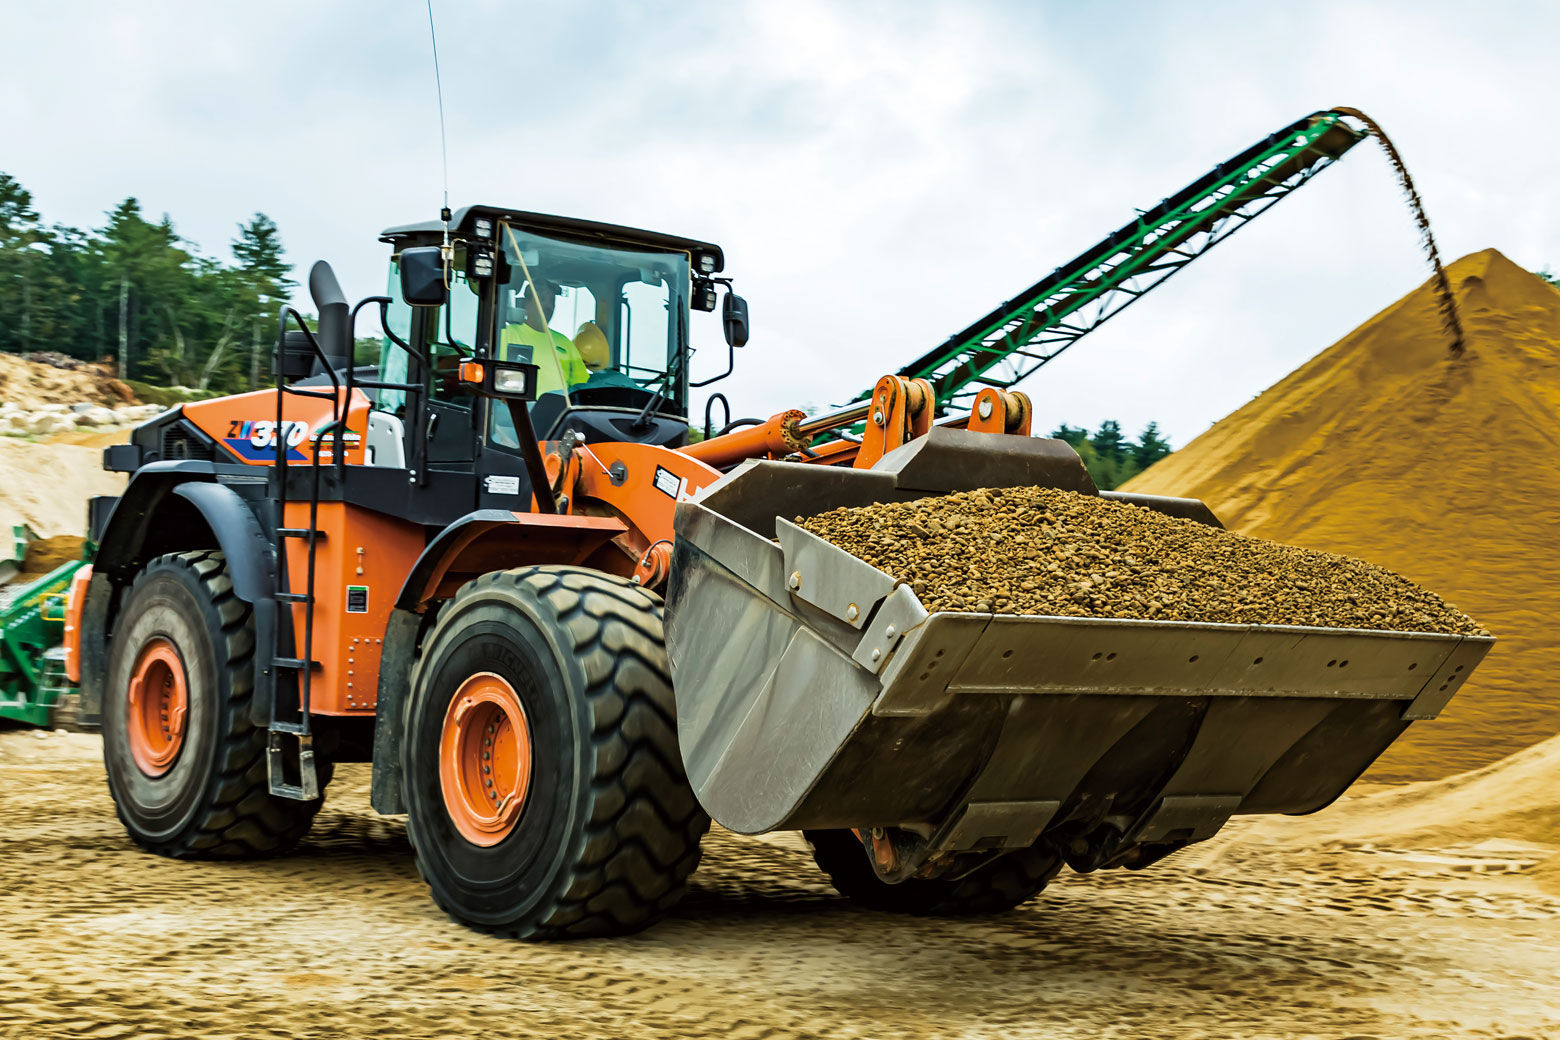 Equipment from Hitachi Construction Machinery plays an active role in excavating and transporting gravel.